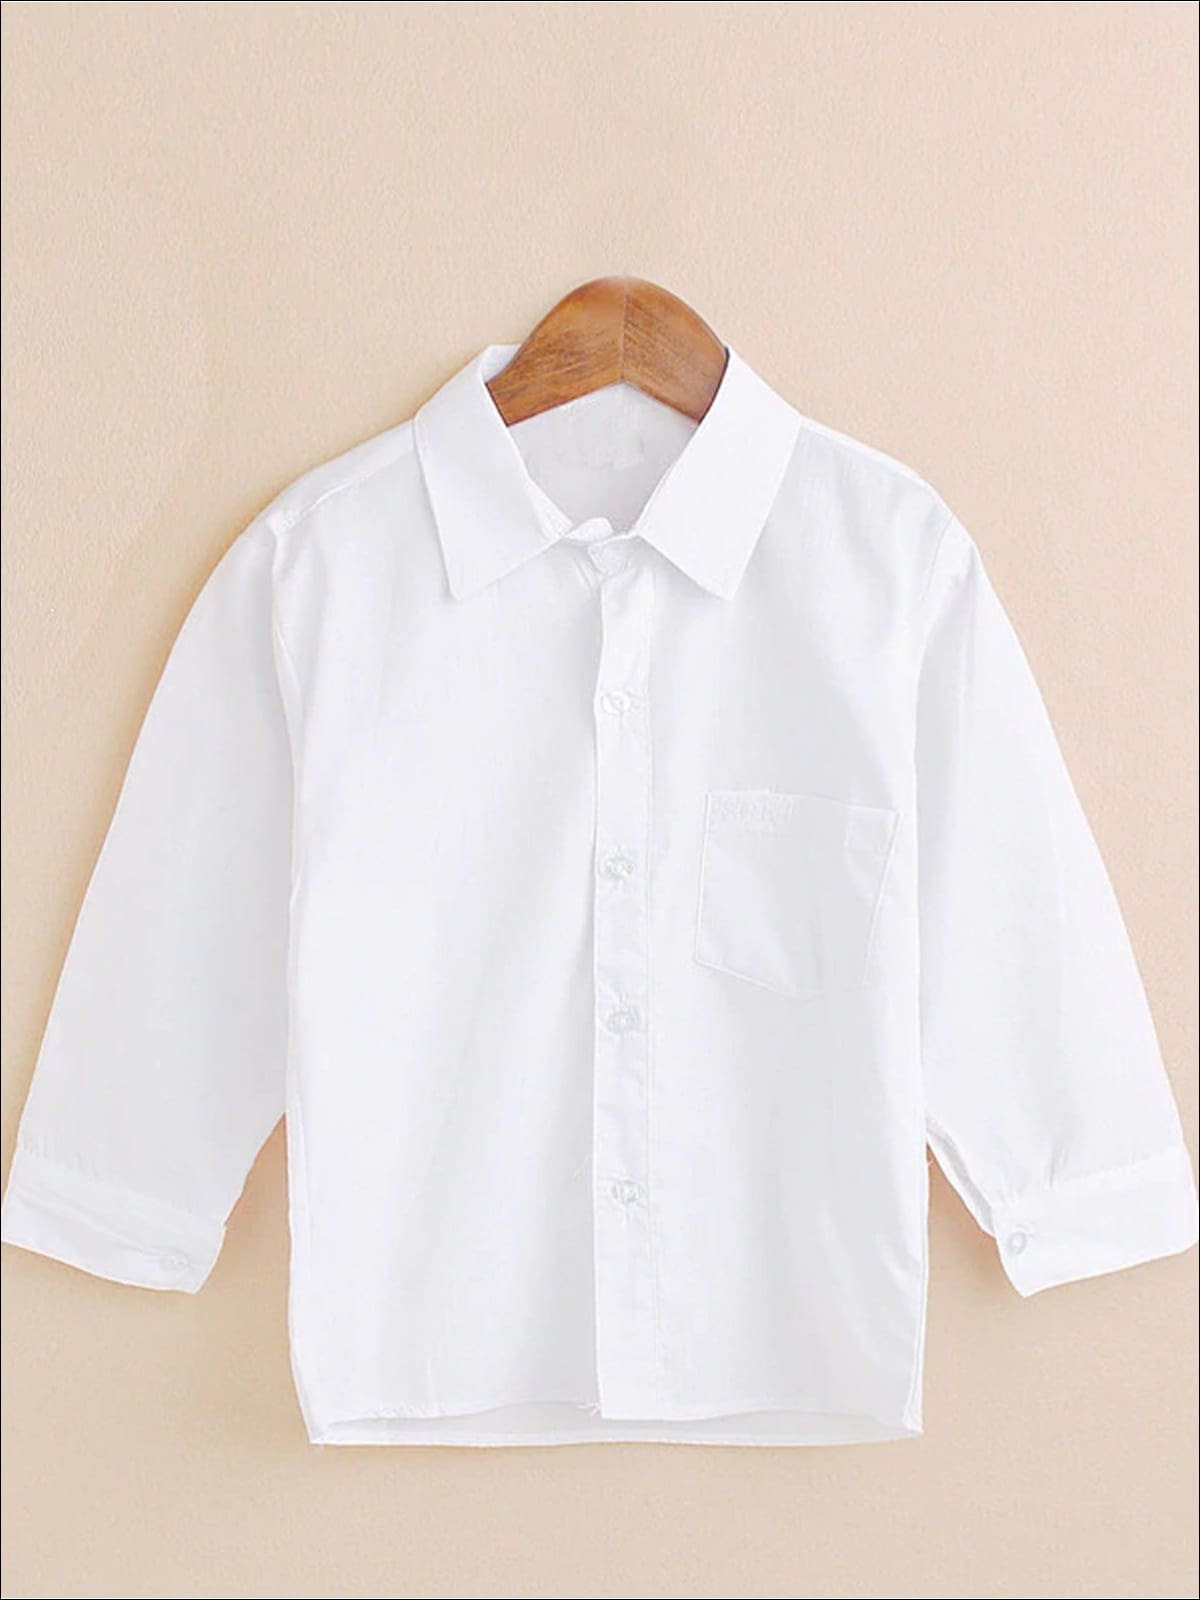 Girls Preppy White Button Up Long Sleeve Top – Mia Belle Girls